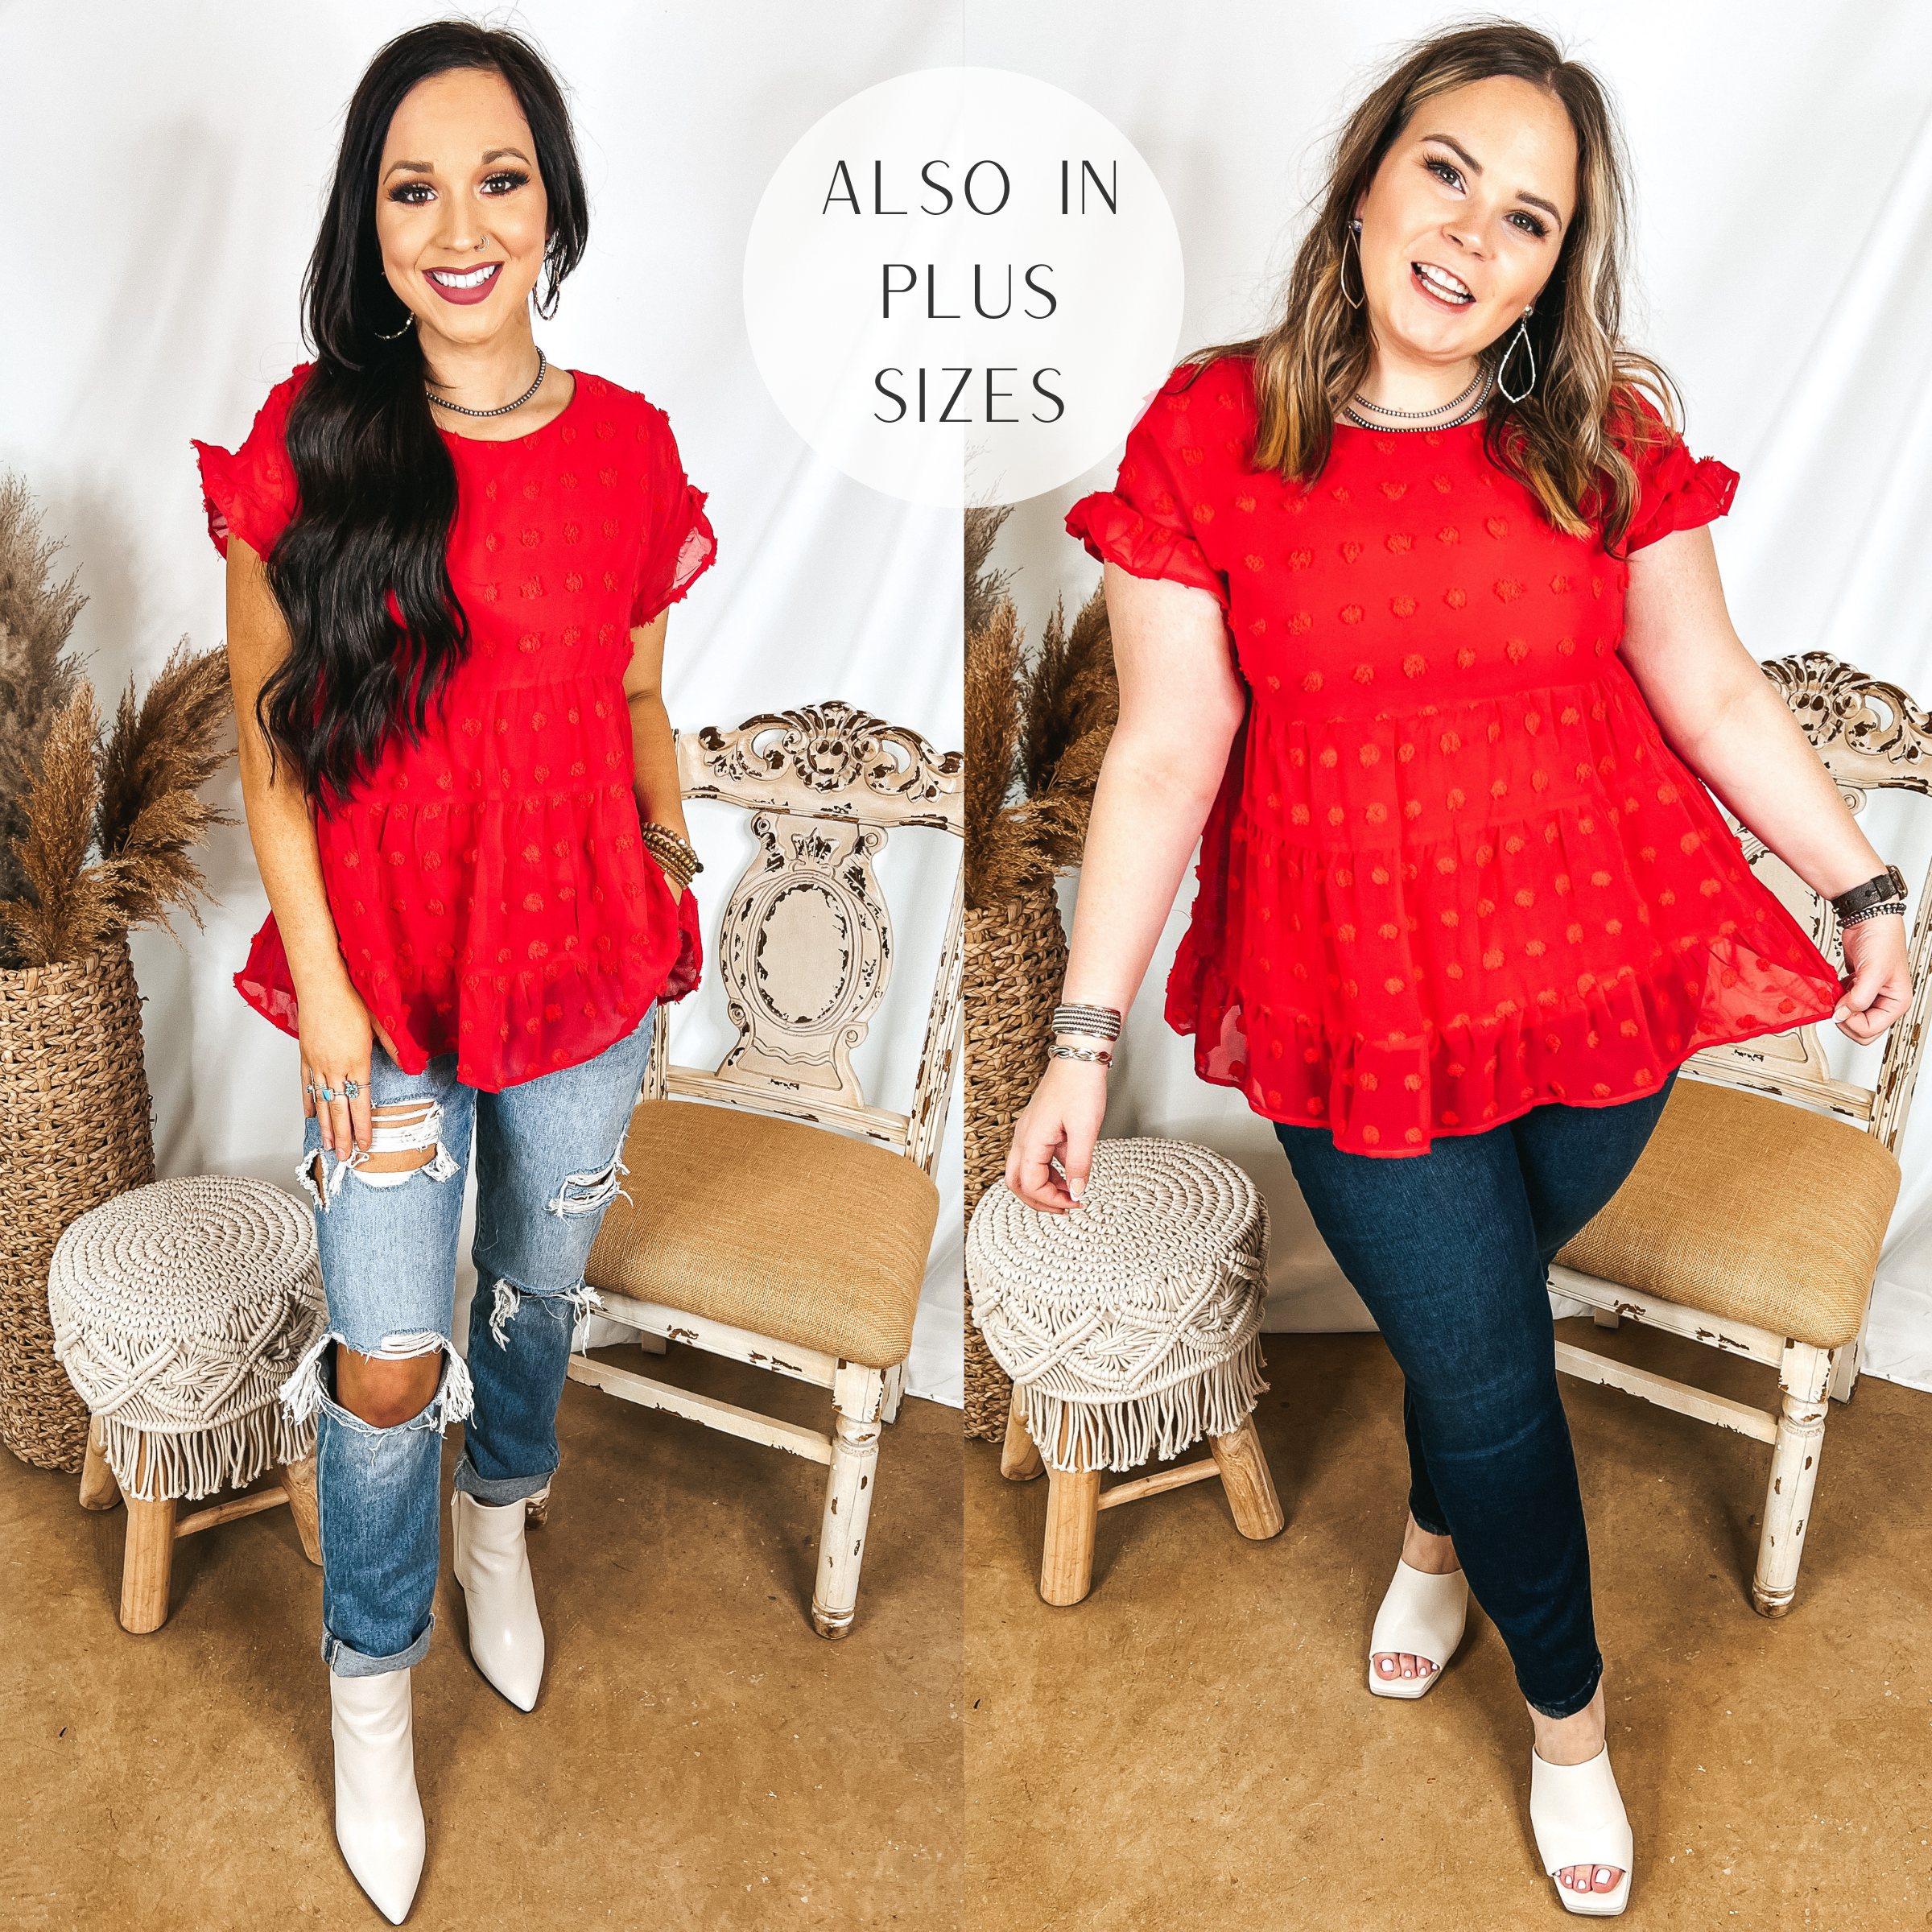 Models are wearing a red babydoll top with a swiss dot pattern. Size small model has it paired with distressed boyfriend jeans and white booties. Size large model has it paired with dark wash skinny jeans and white heels.